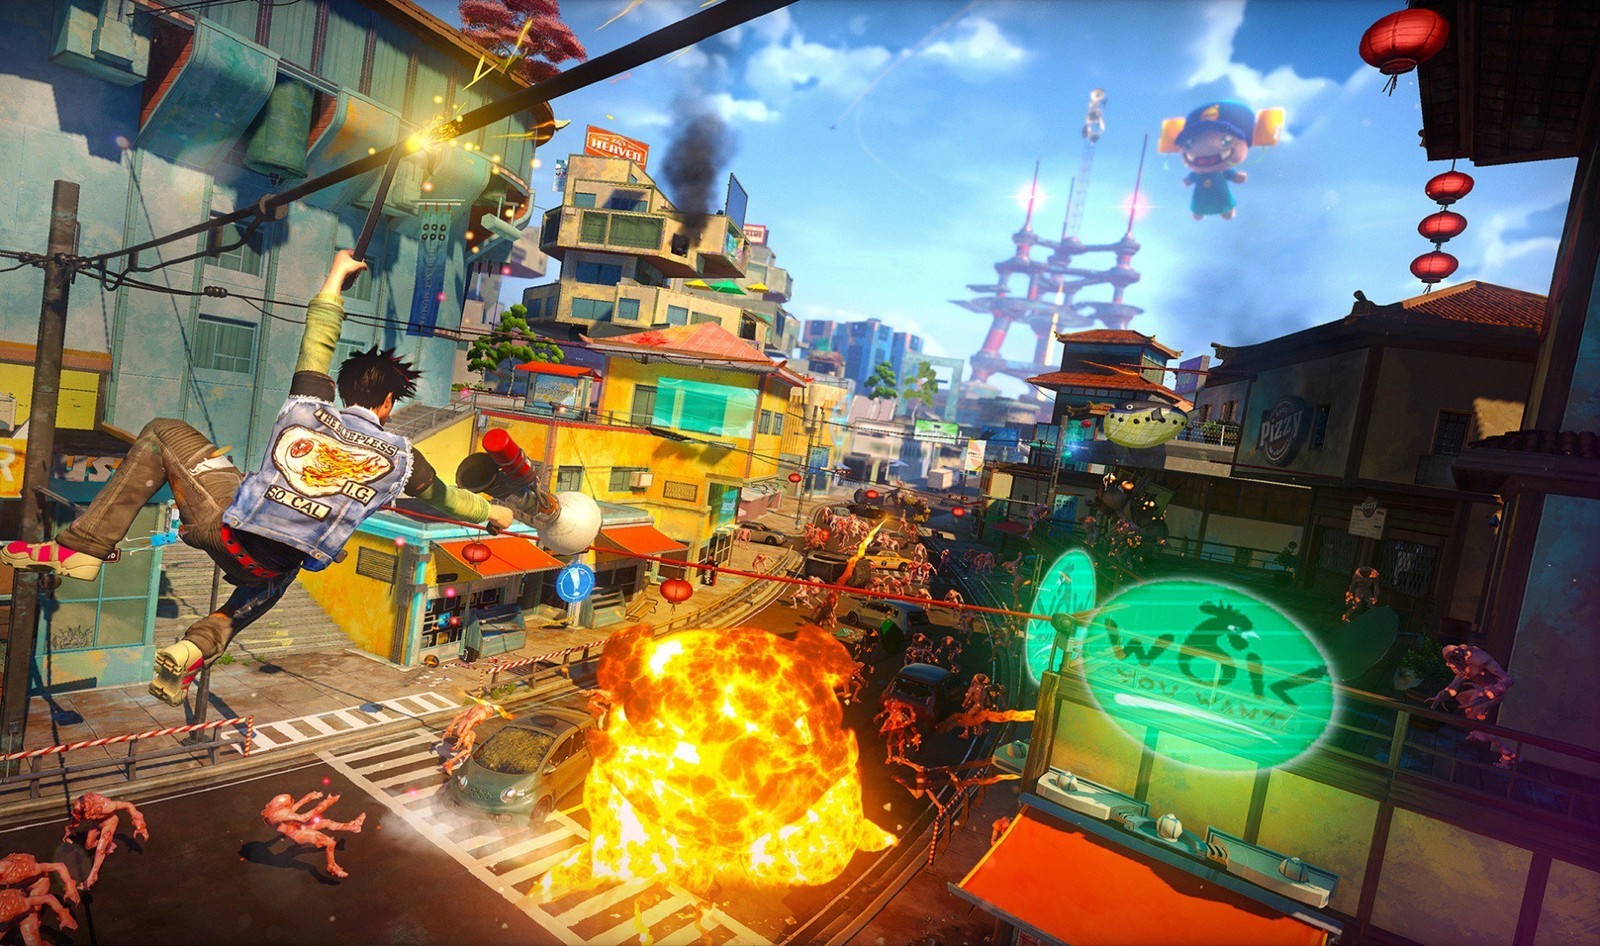 Sunset Overdrive Download Pc